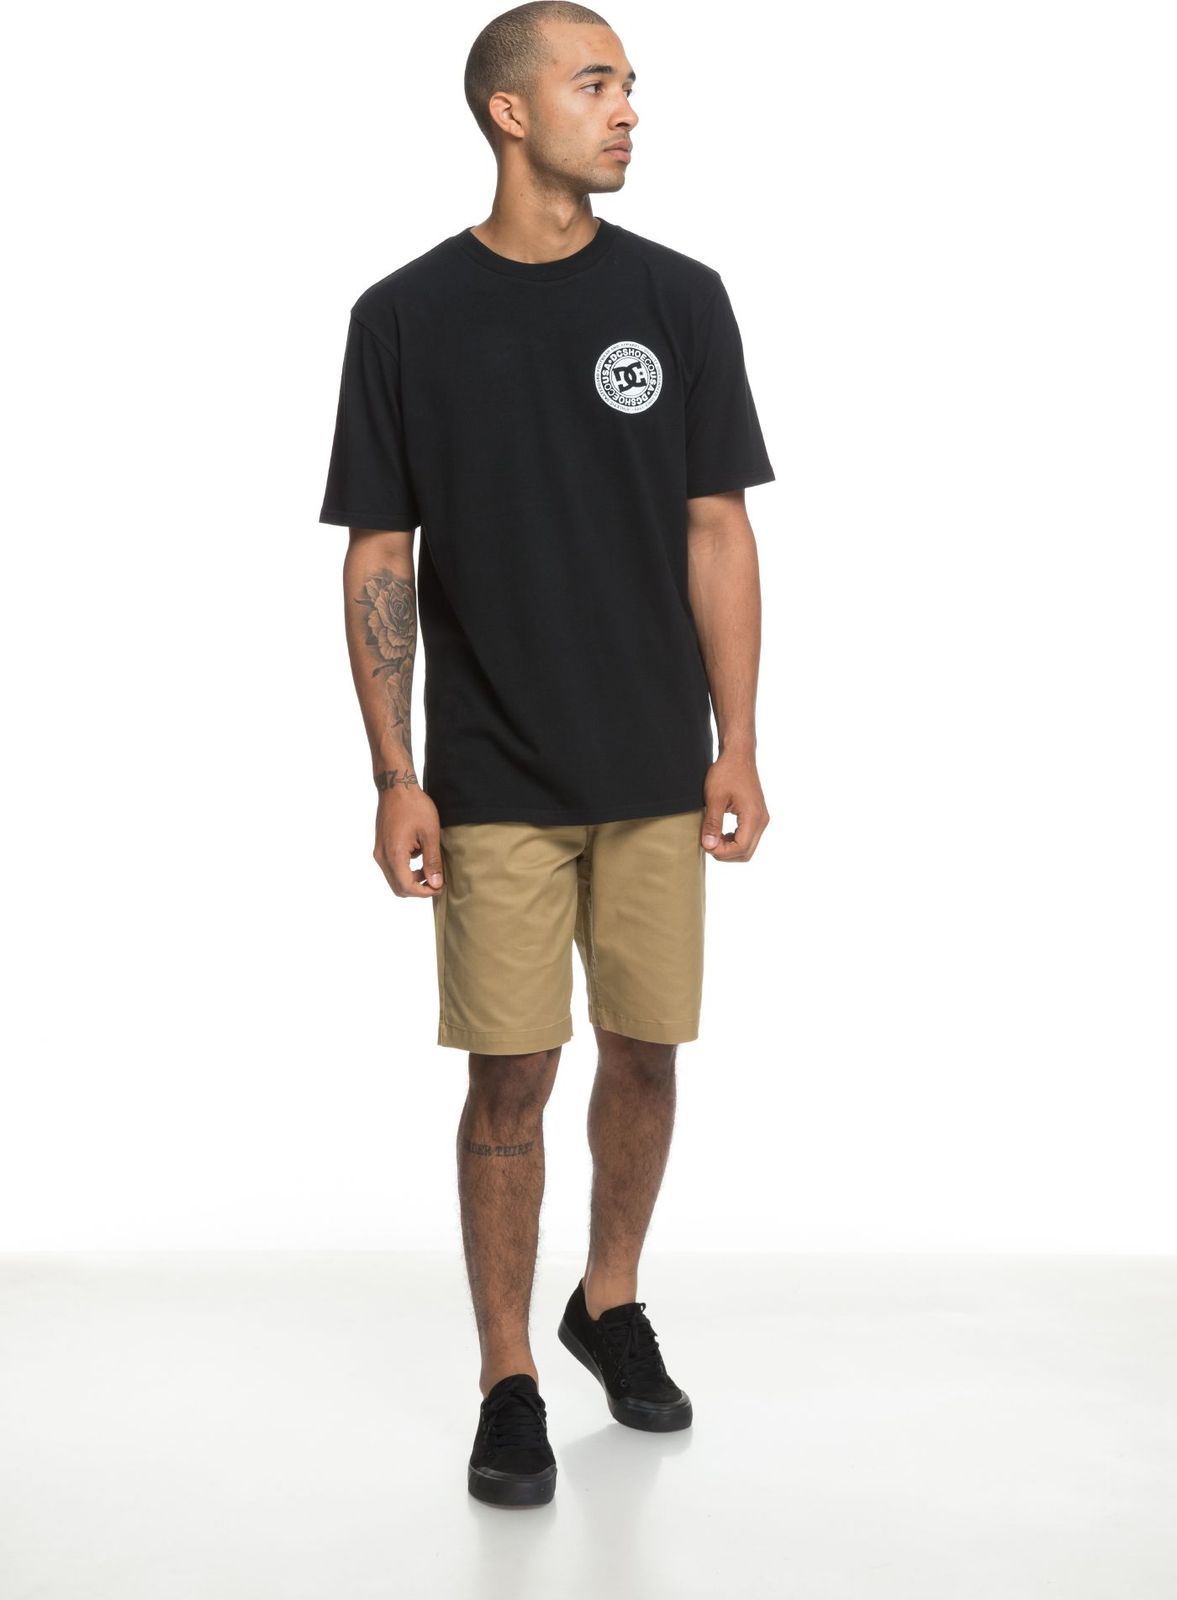   DC Shoes Worker Straight, : . EDYWS03111-CLM0.  32 (46/48)